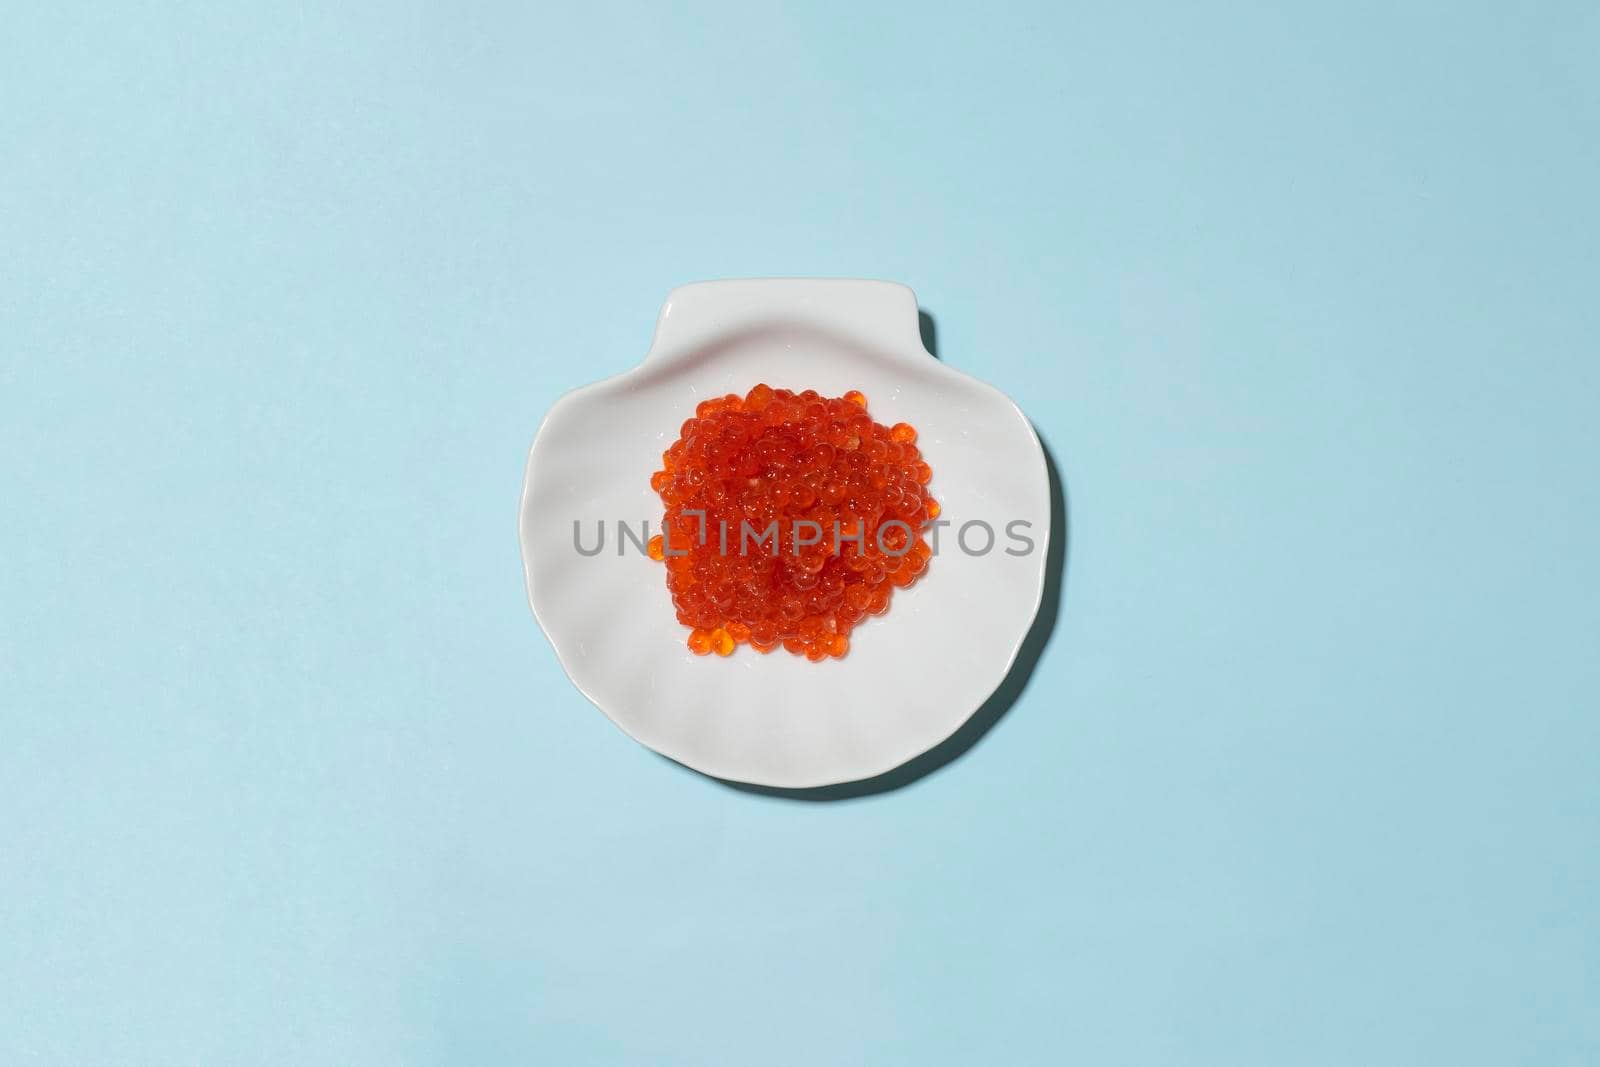 Porcelain plate with red caviar on a blue background by Vvicca